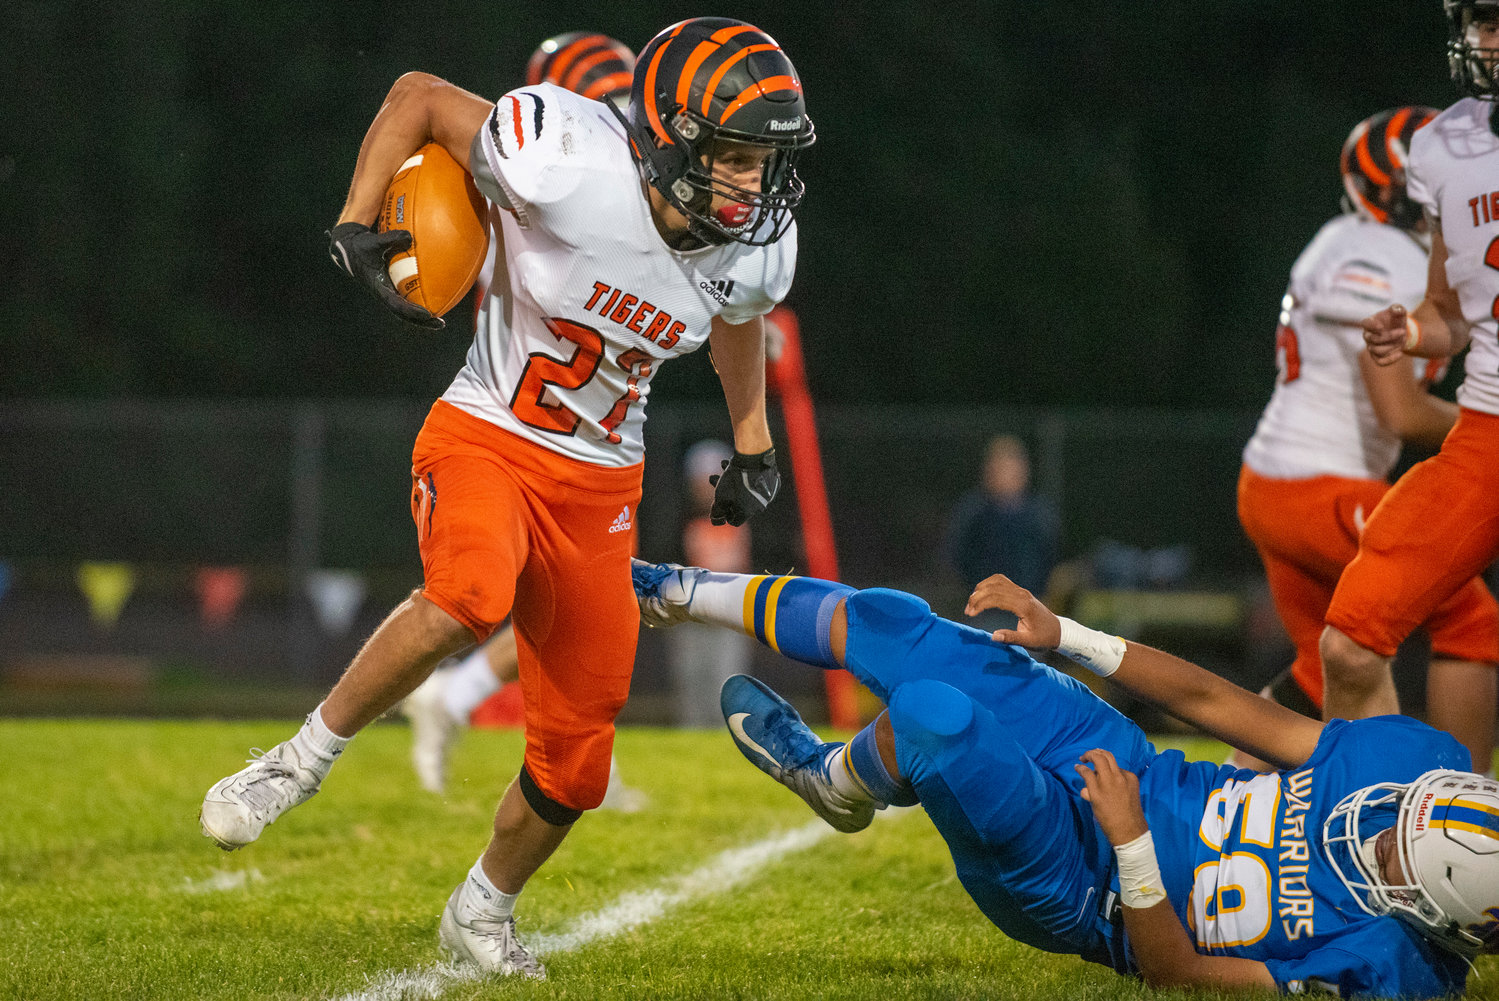 Centralia’s Anthony Saucedo (27) escapes a would-be Rochester tackler on Saturday, Oct. 2, 2021.